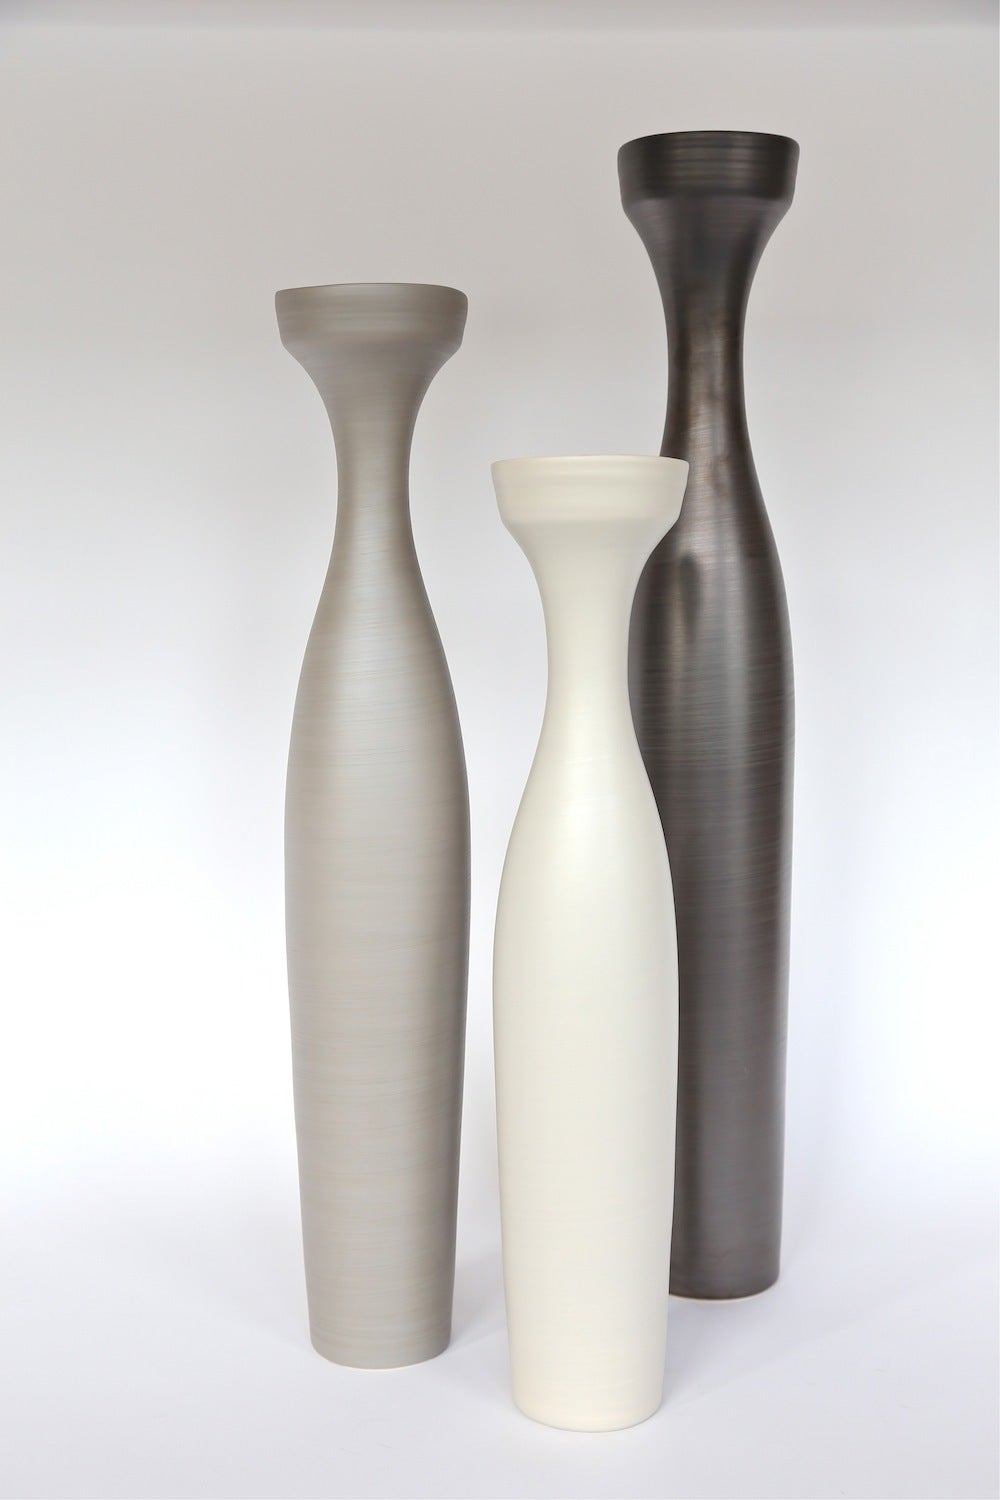 Italian handmade ceramic vases in linen, dark bronze and light brown by Rina Menardi. Available in different colors. Priced individually.

Measures: Small $745 (Diameter 4.25